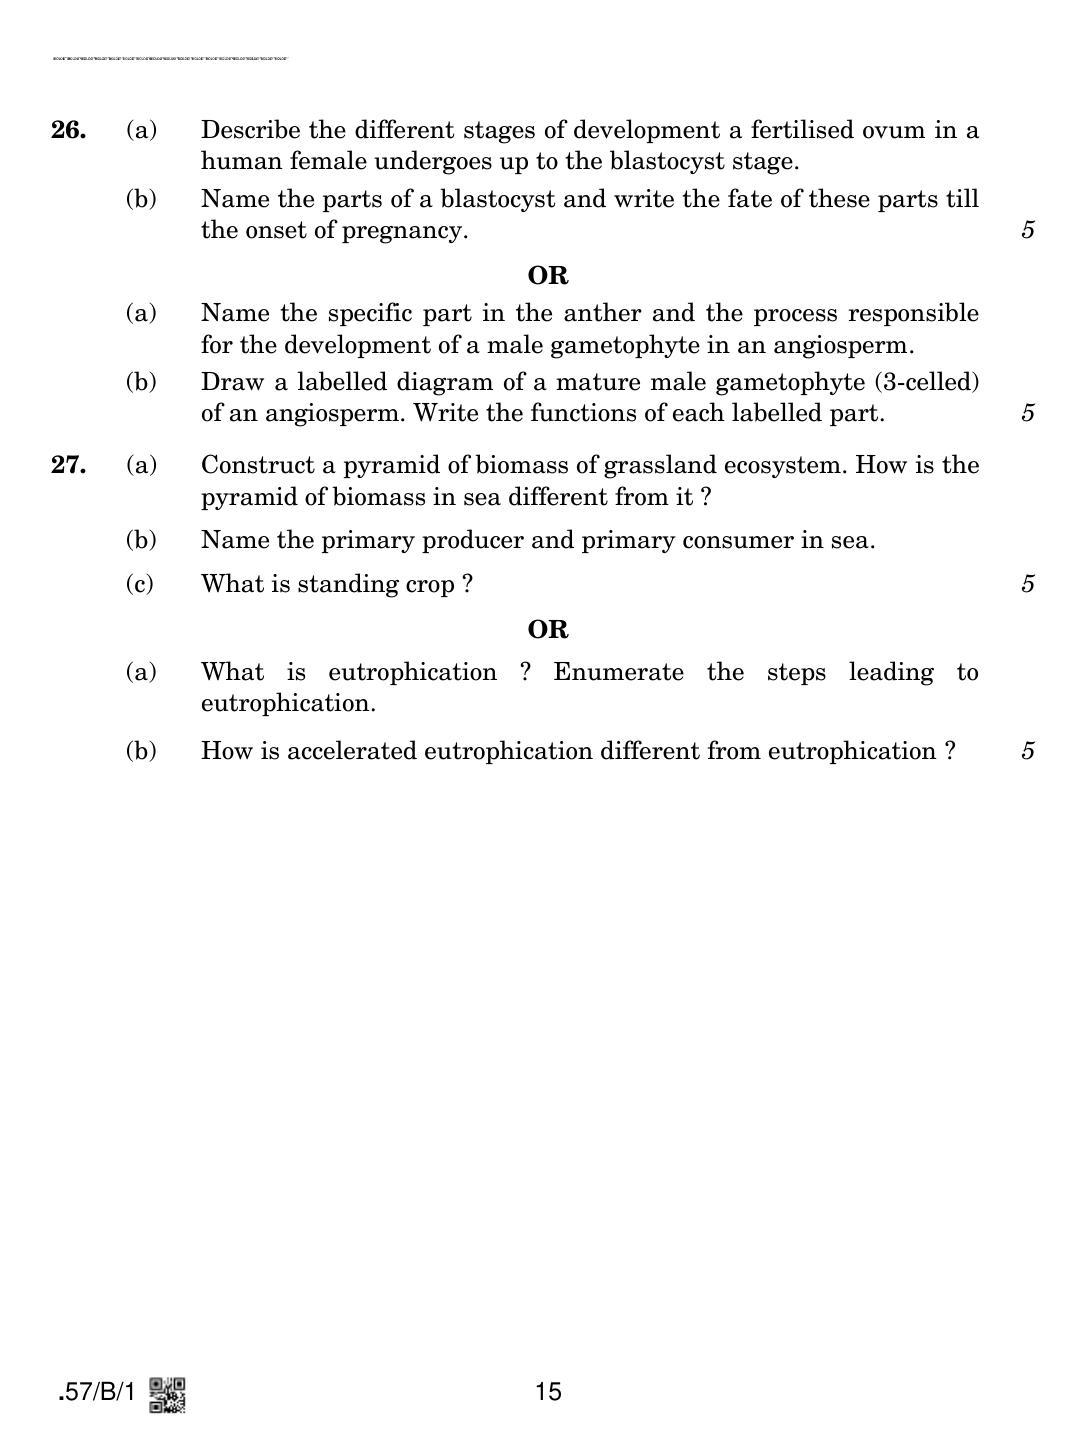 CBSE Class 12 57-C-1 - Biology 2020 Compartment Question Paper - Page 15